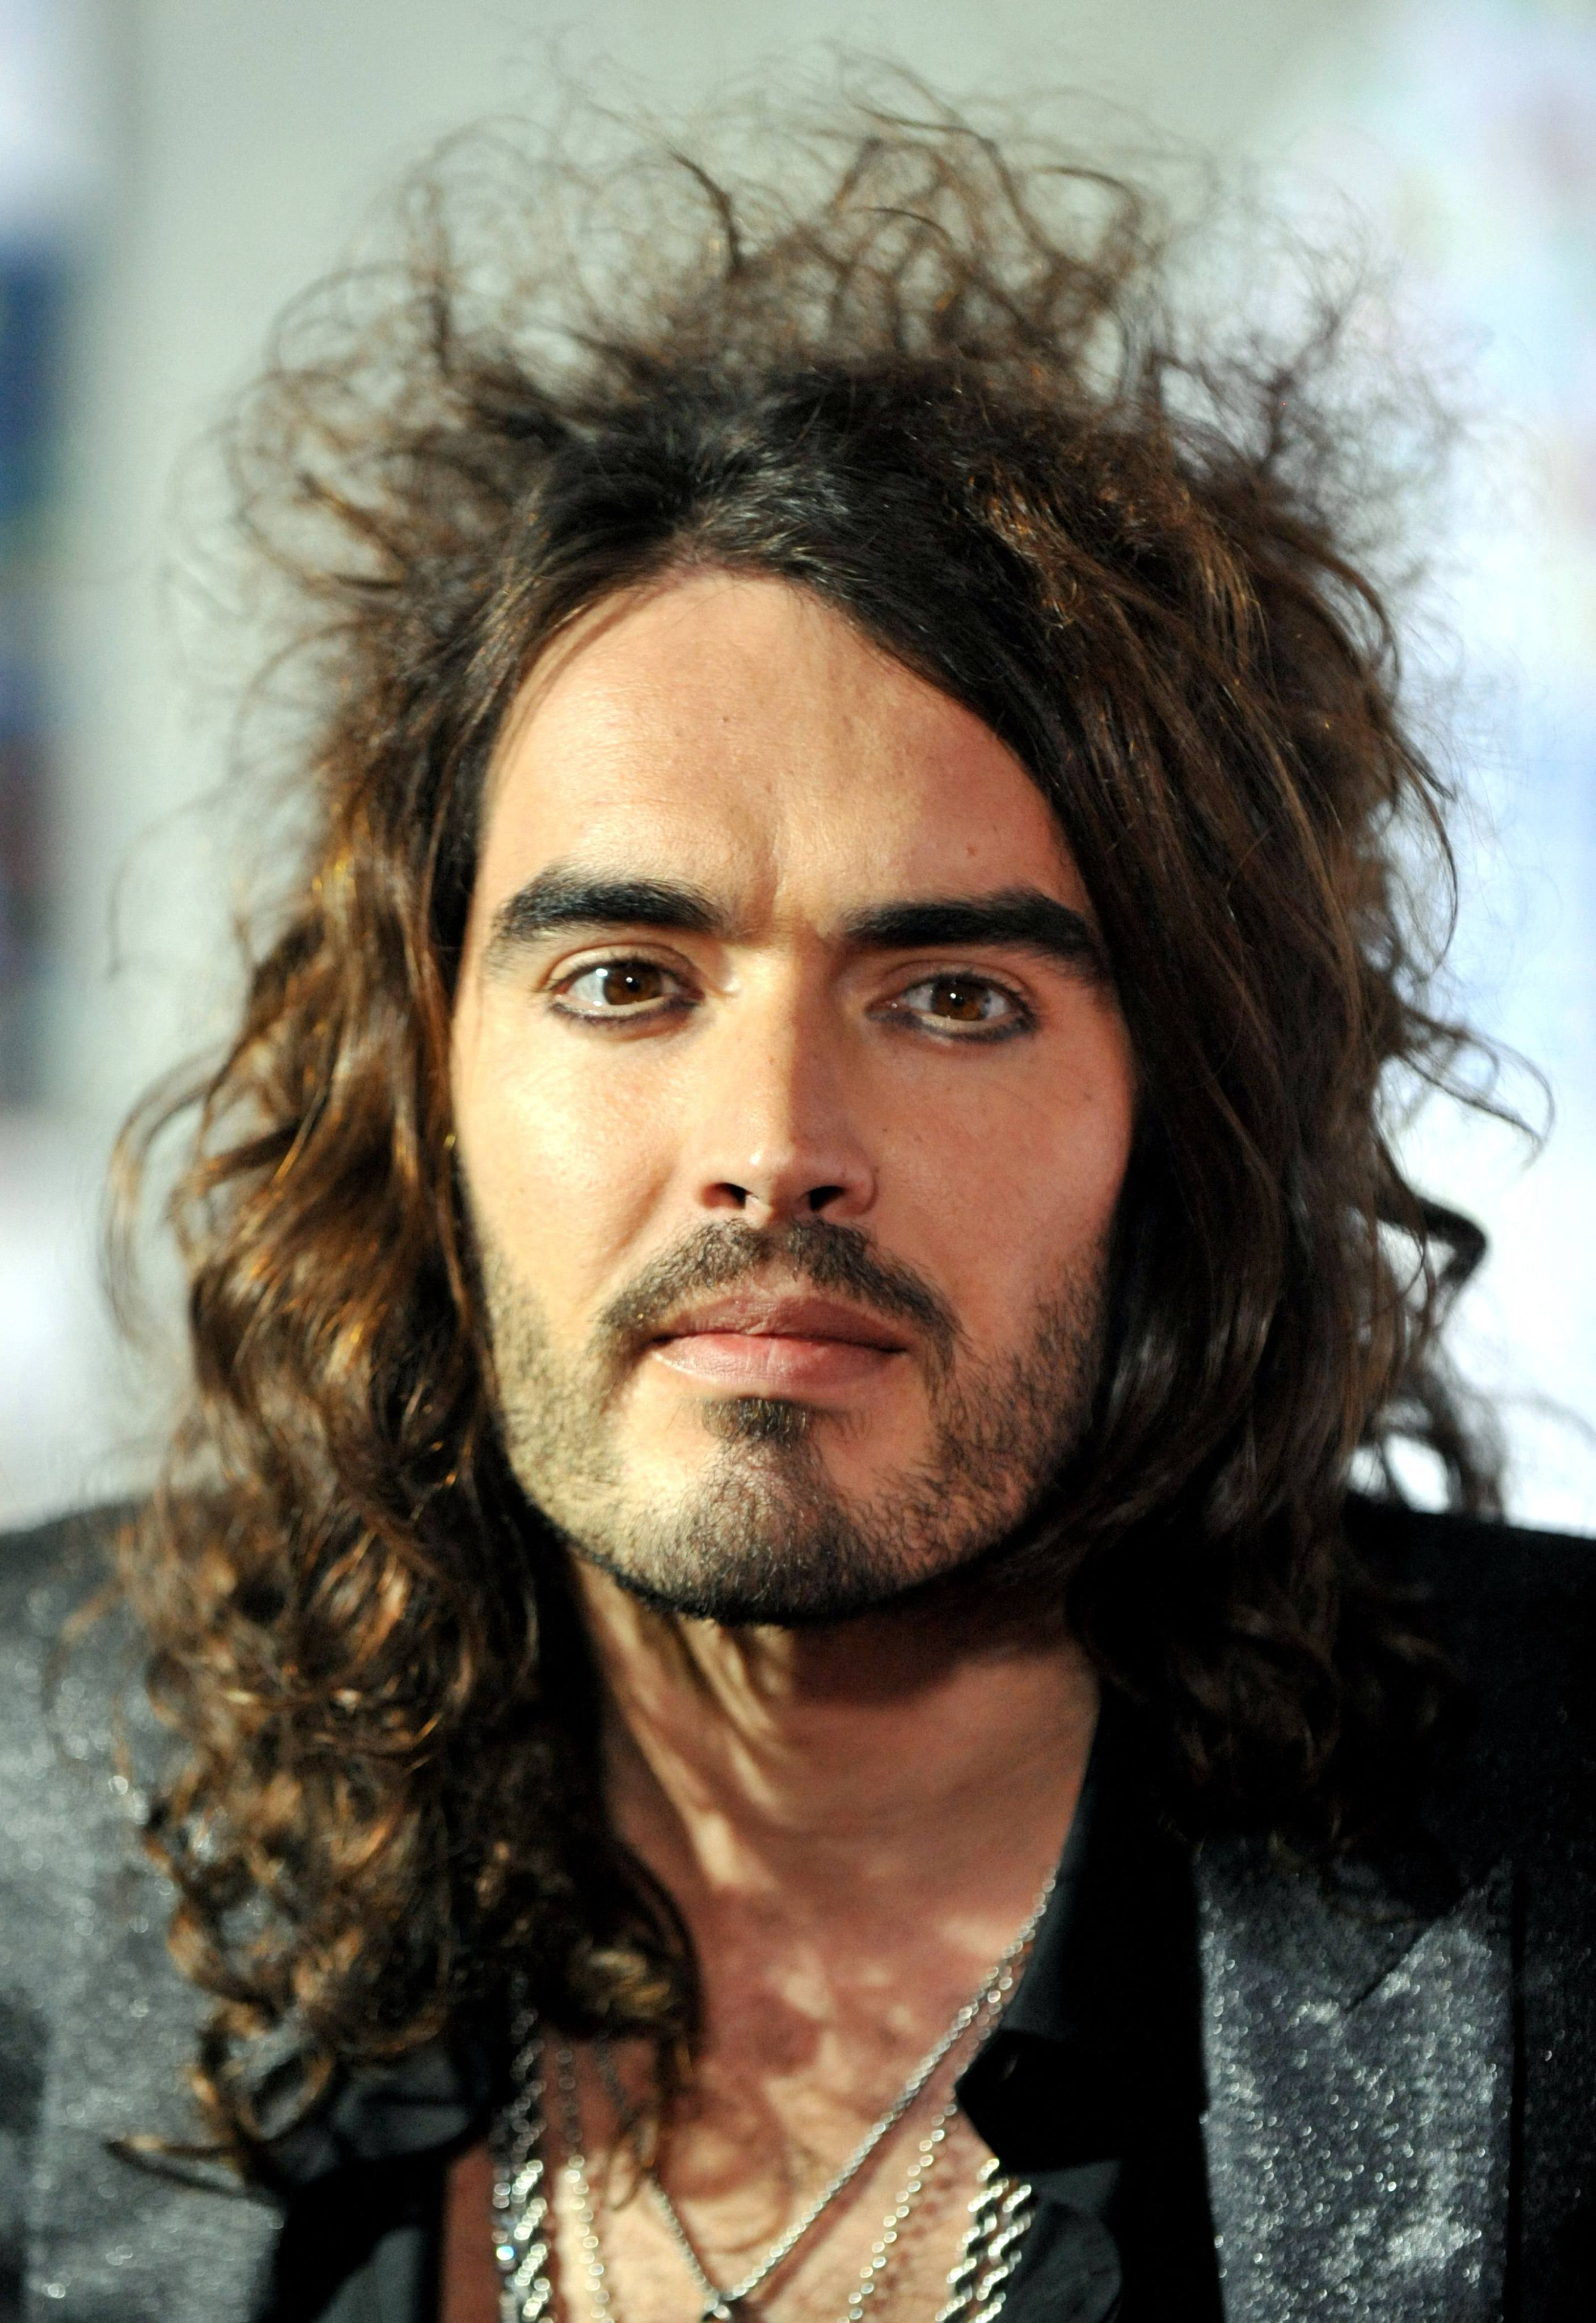 The British comedian and actor Russell Brand has been accused of rape, sexual assault and emotional abuse. File photo: AFP